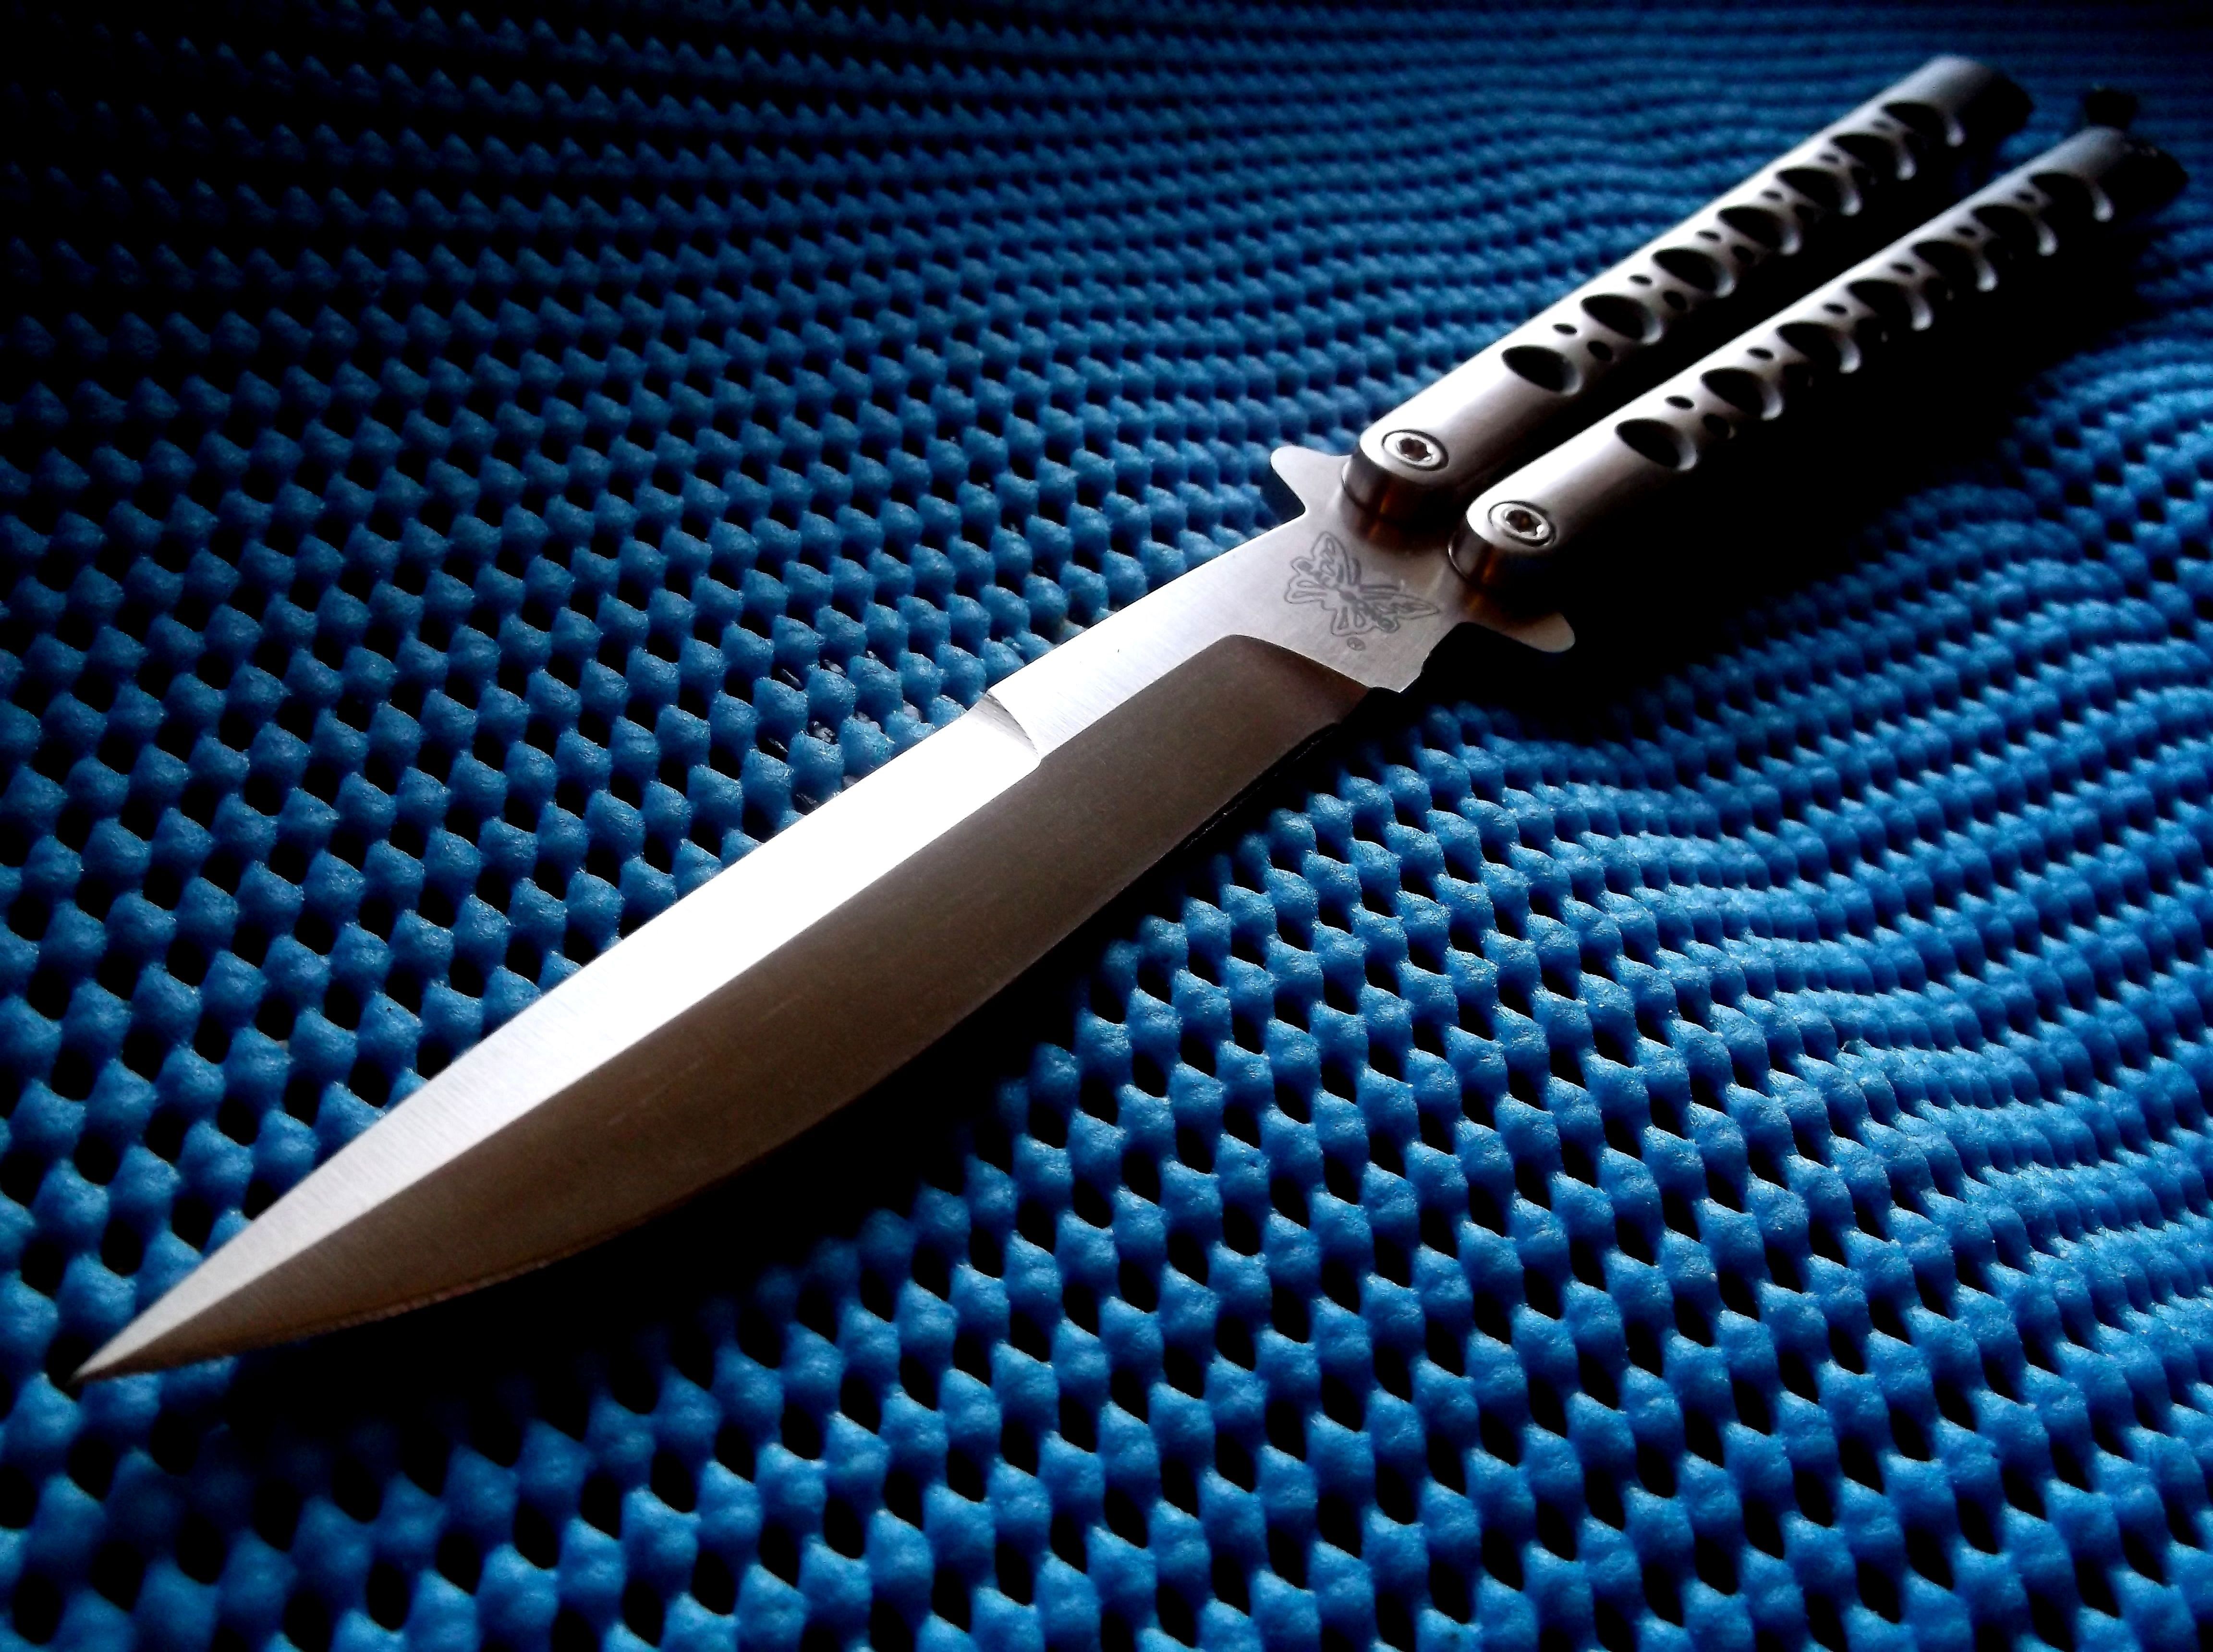 free download picture of knife (Bond Murphy 4608x3440). Knife, Butterfly knife, Cool knives